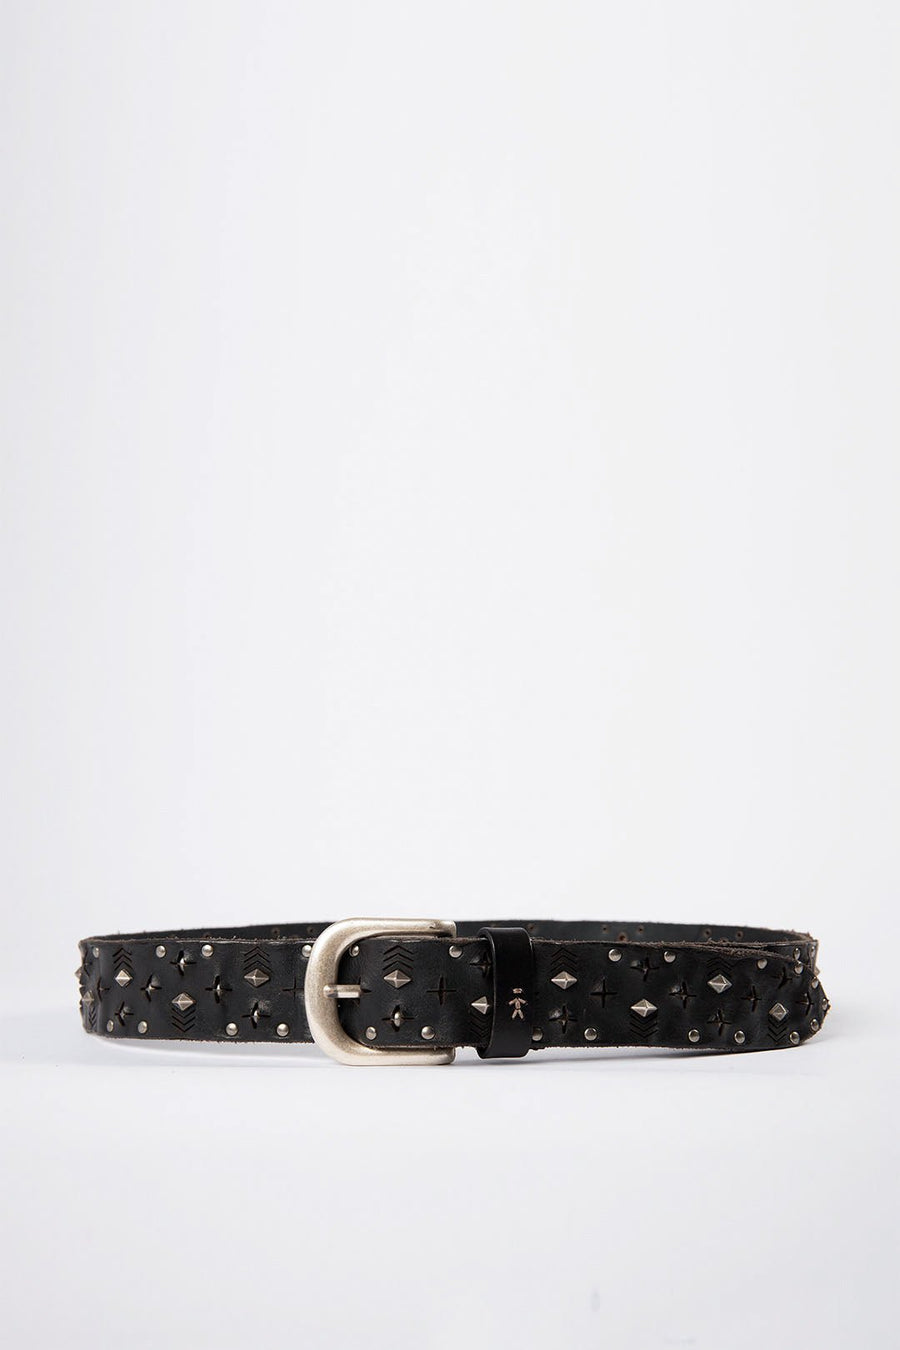 HENRY BEGUELIN BELT WITH SILVER STUDS, BLACK - Burning Torch Online Boutique